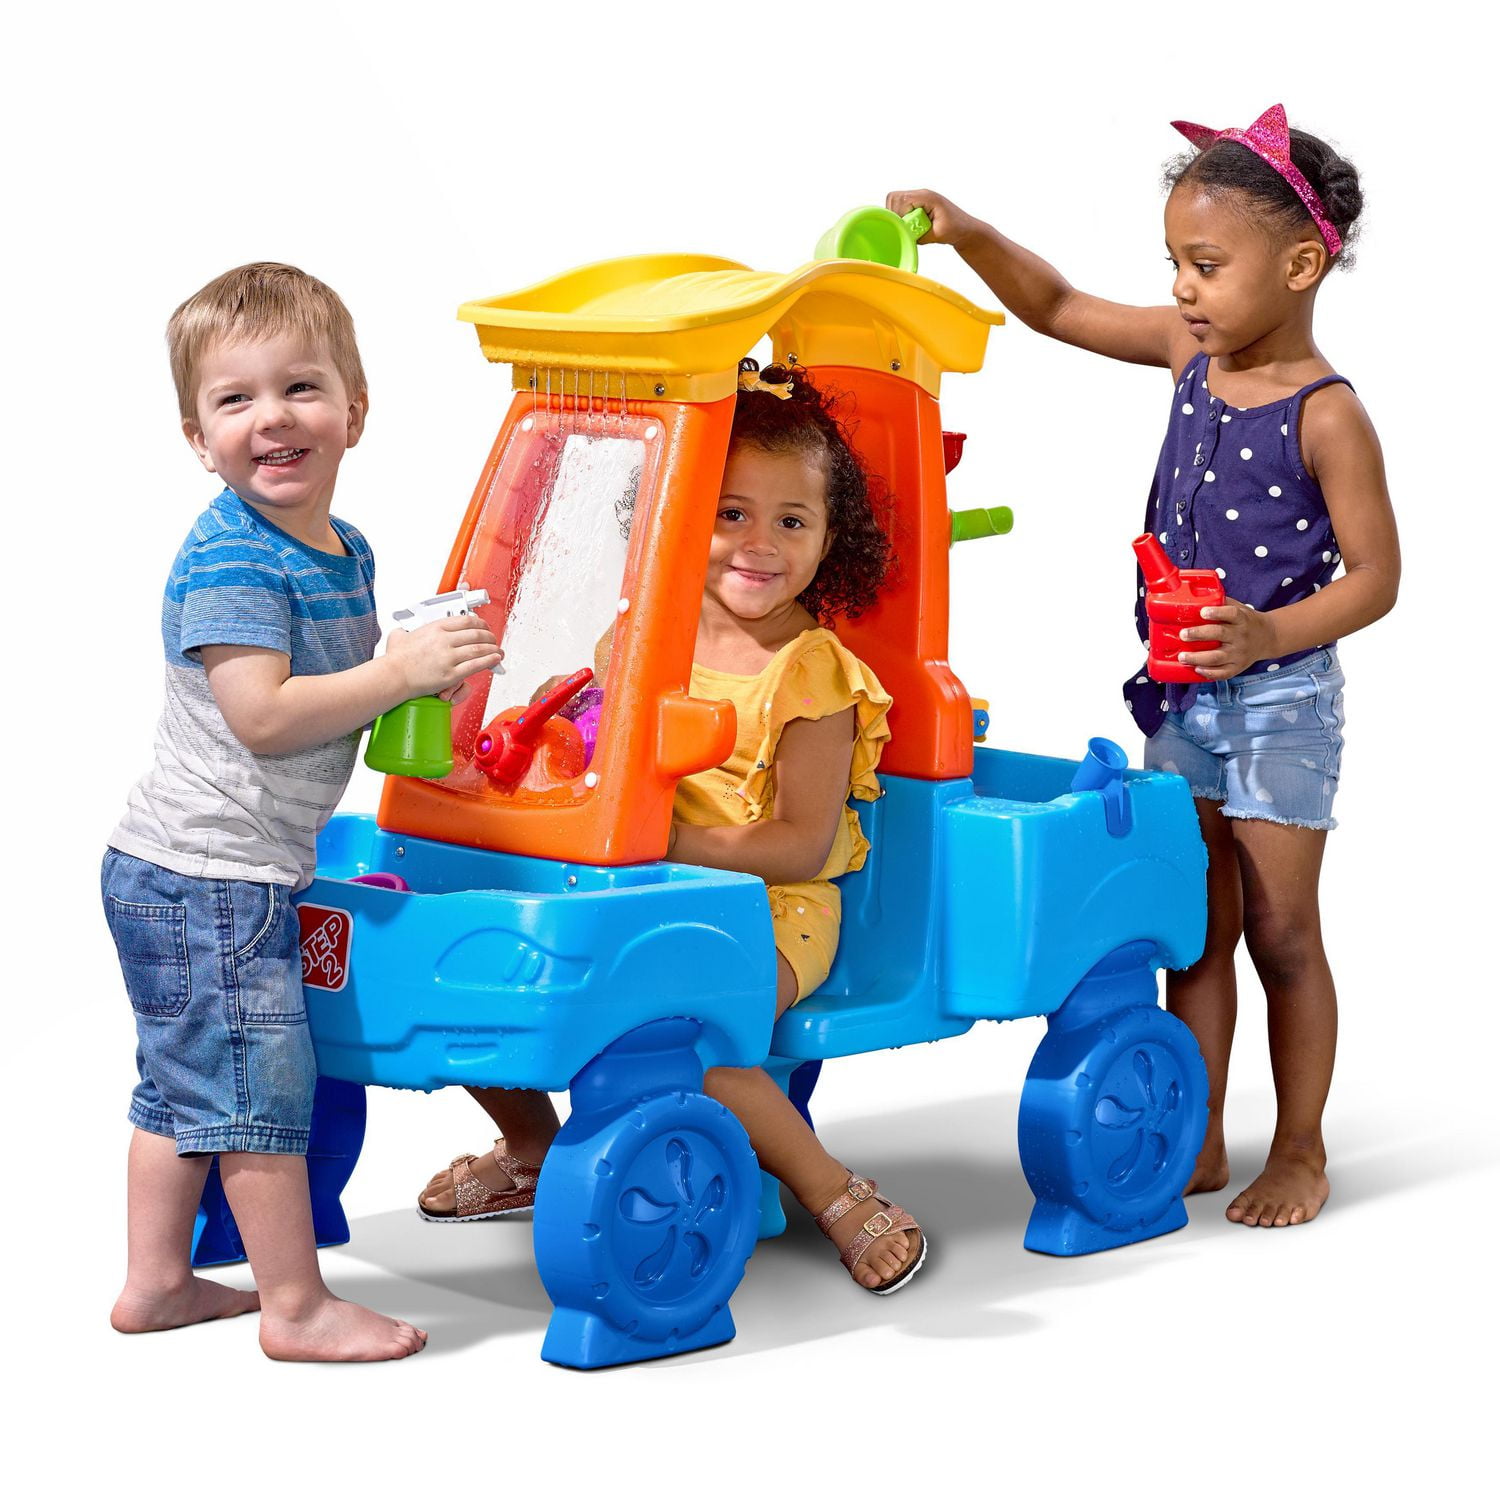 Doll Bath Activity Center for Toddlers and Preschoolers - Happy